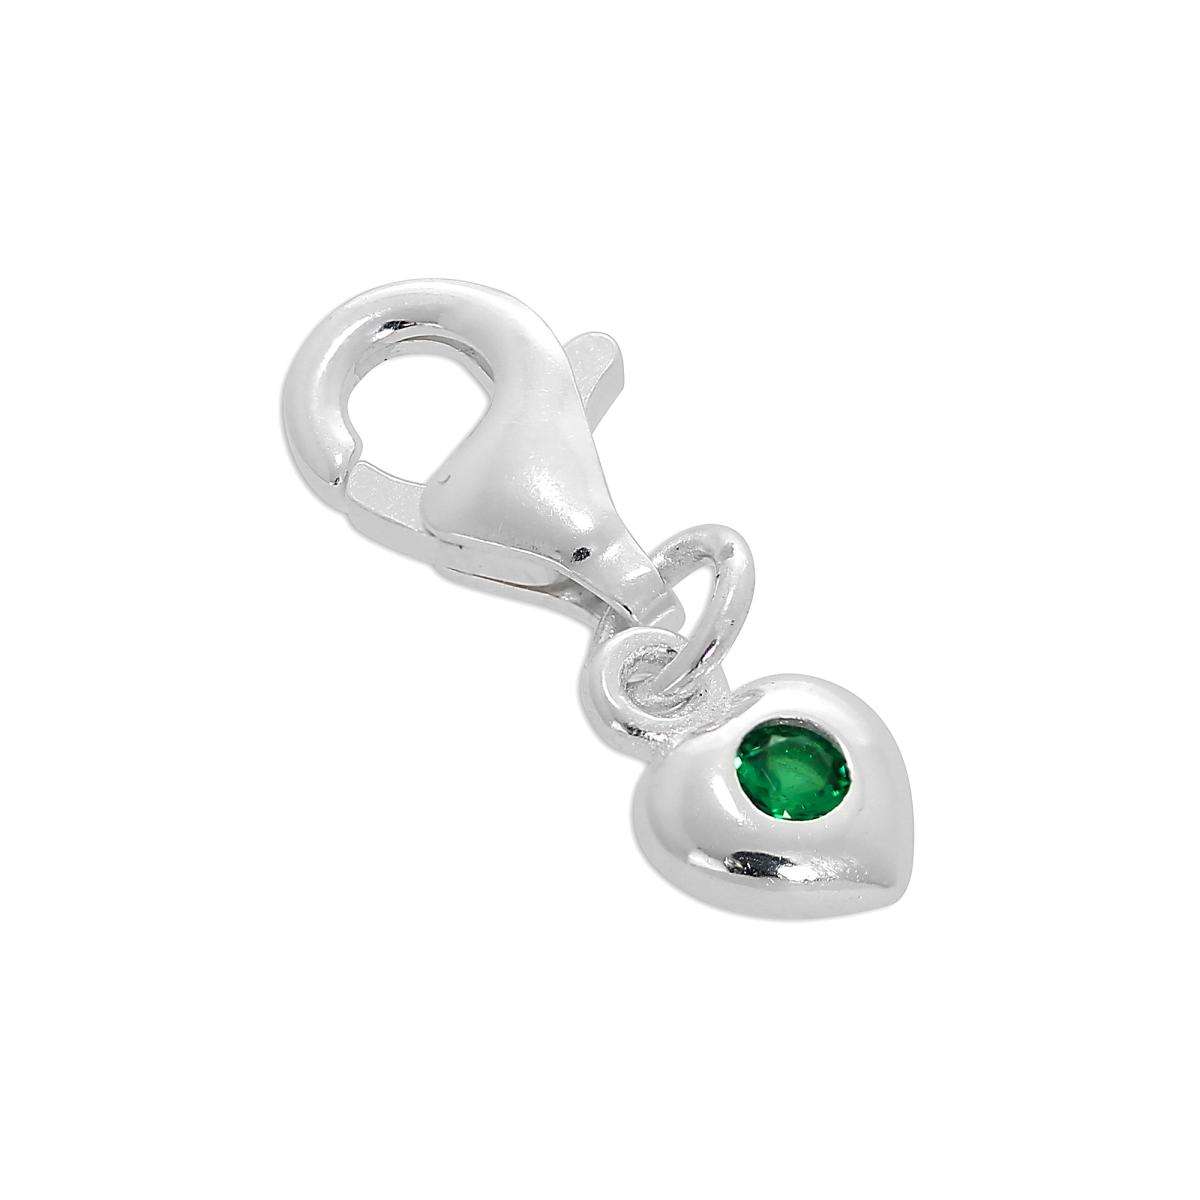 Wholesale Dyed Emerald Birthstone Charm | Cheap Price Of May Birthstone |